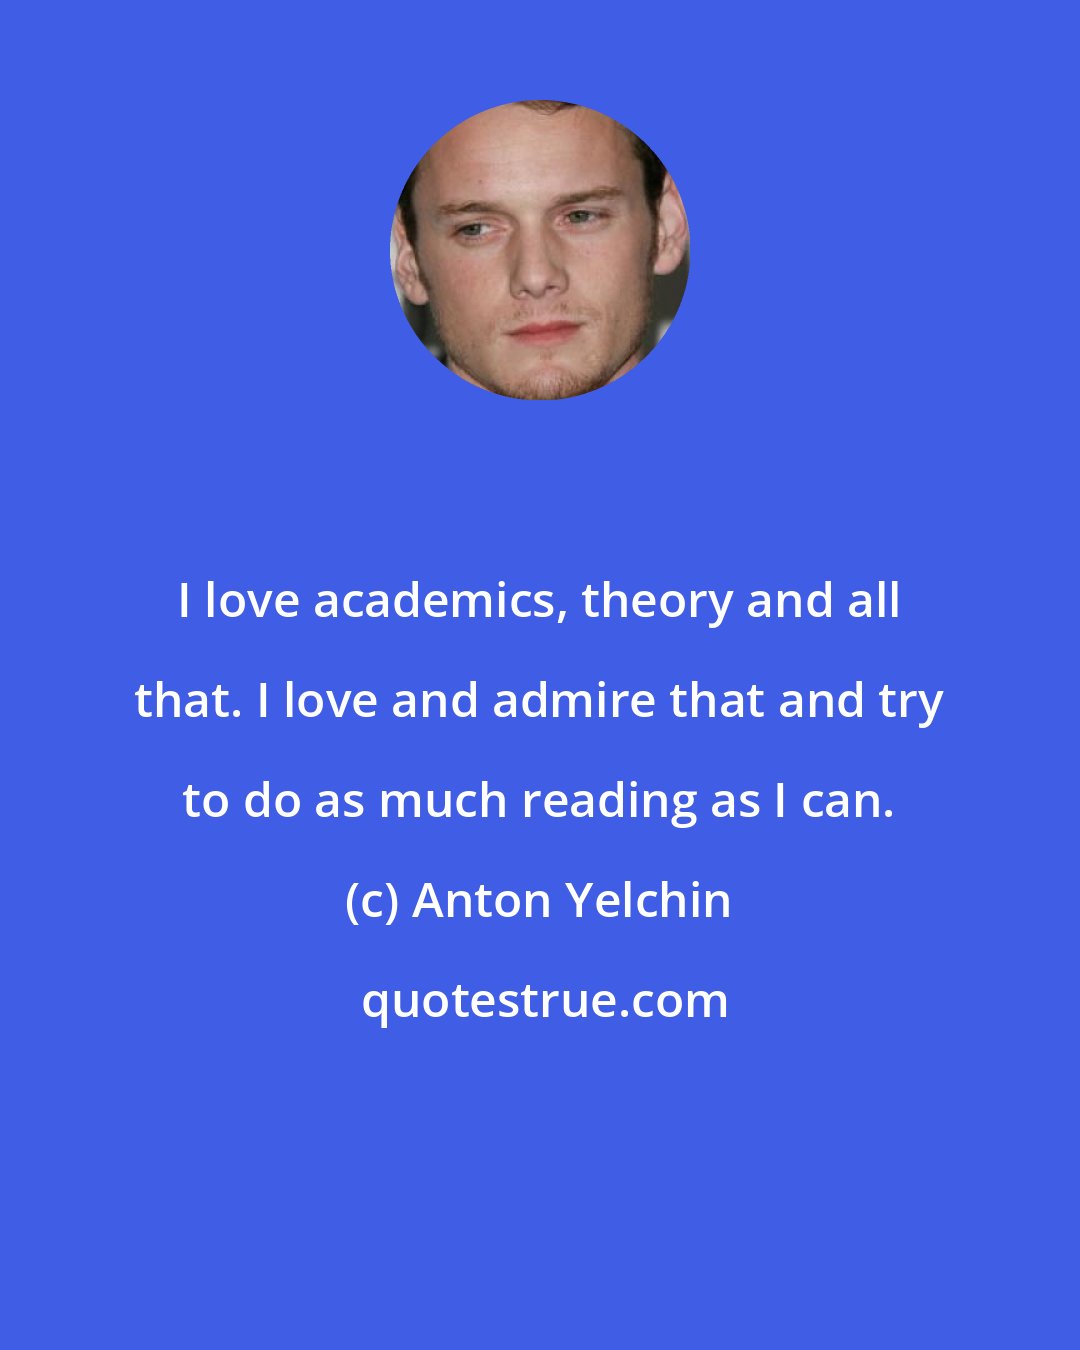 Anton Yelchin: I love academics, theory and all that. I love and admire that and try to do as much reading as I can.